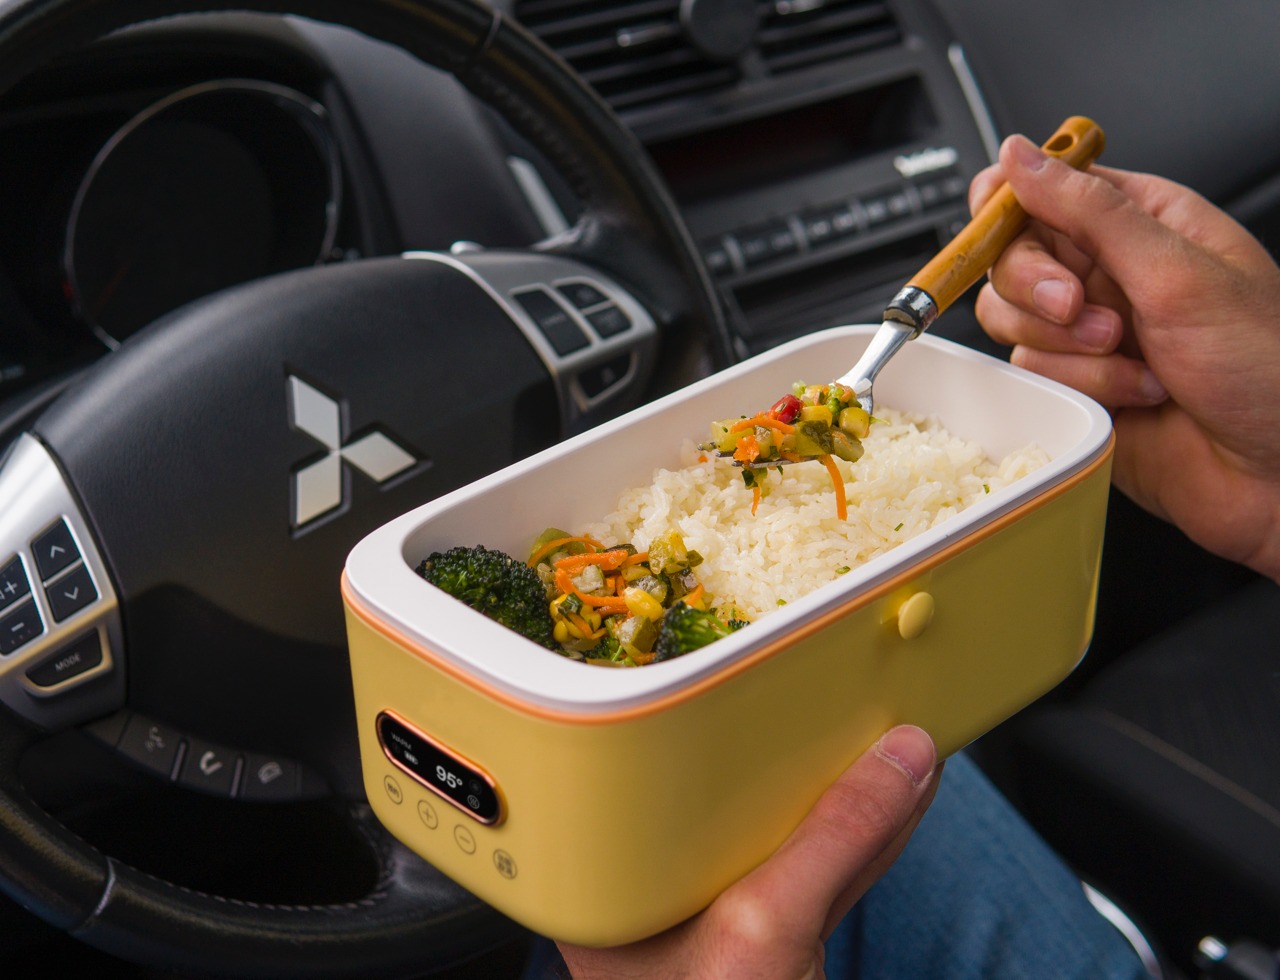 https://www.yankodesign.com/images/design_news/2022/06/solar-powered_self_heating_and_cooling_lunchvbox_04.jpg